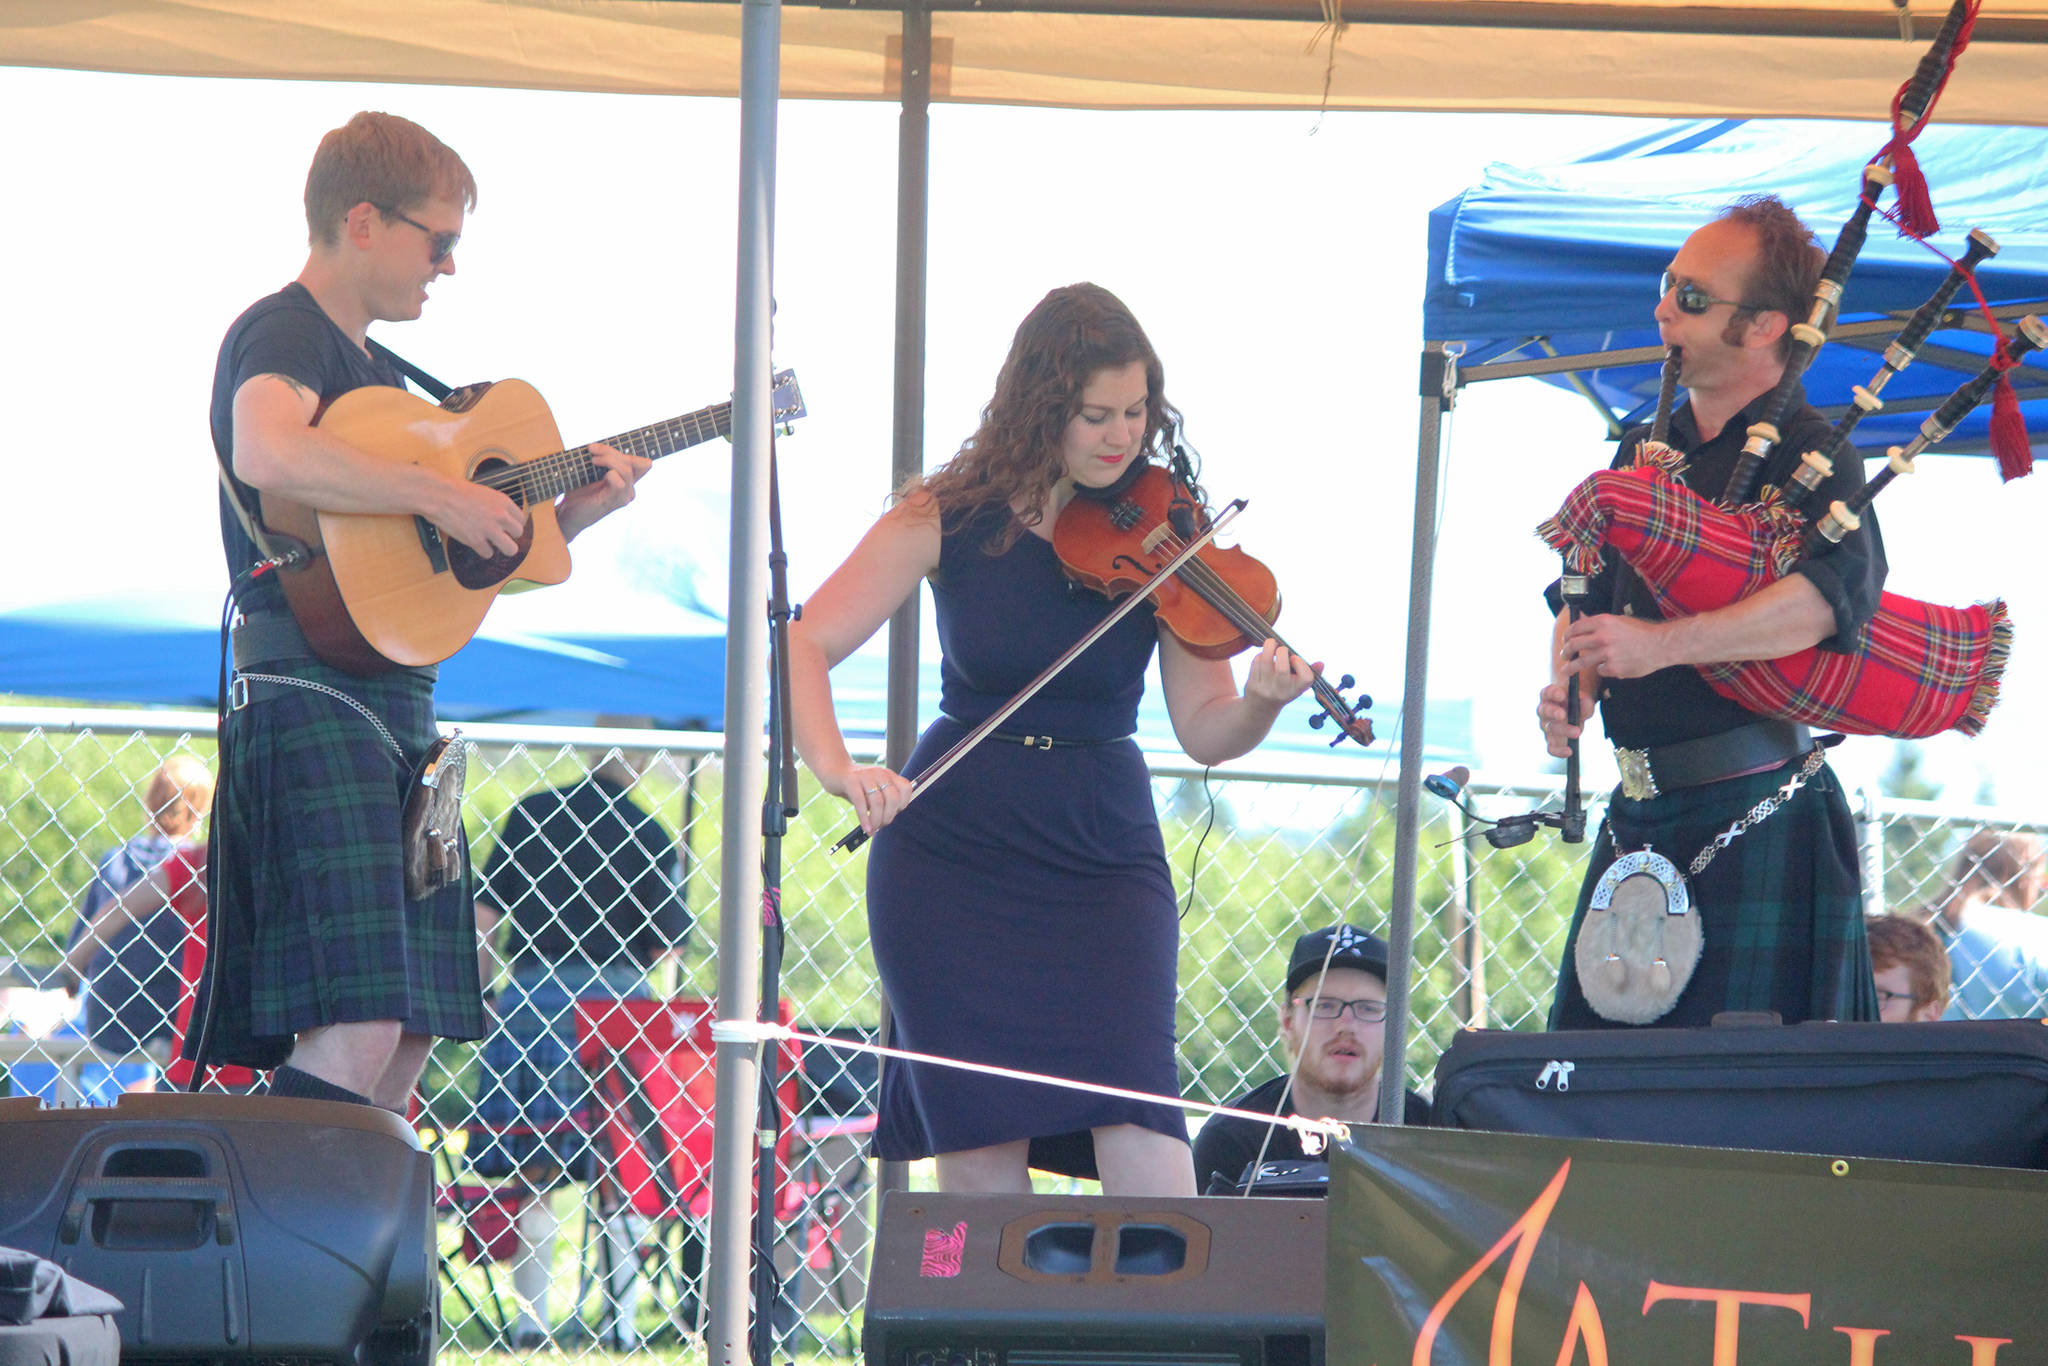 Members of the Scottish band The Fire perform on a small stage at the Kachemak Bay Scottish Highland Games on Saturday, July 7, 2018 at Karen Hornaday Park in Homer, Alaska. The trio also performed at an after party at the Kannery Grill later that evening. (Photo by Megan Pacer/Homer News)